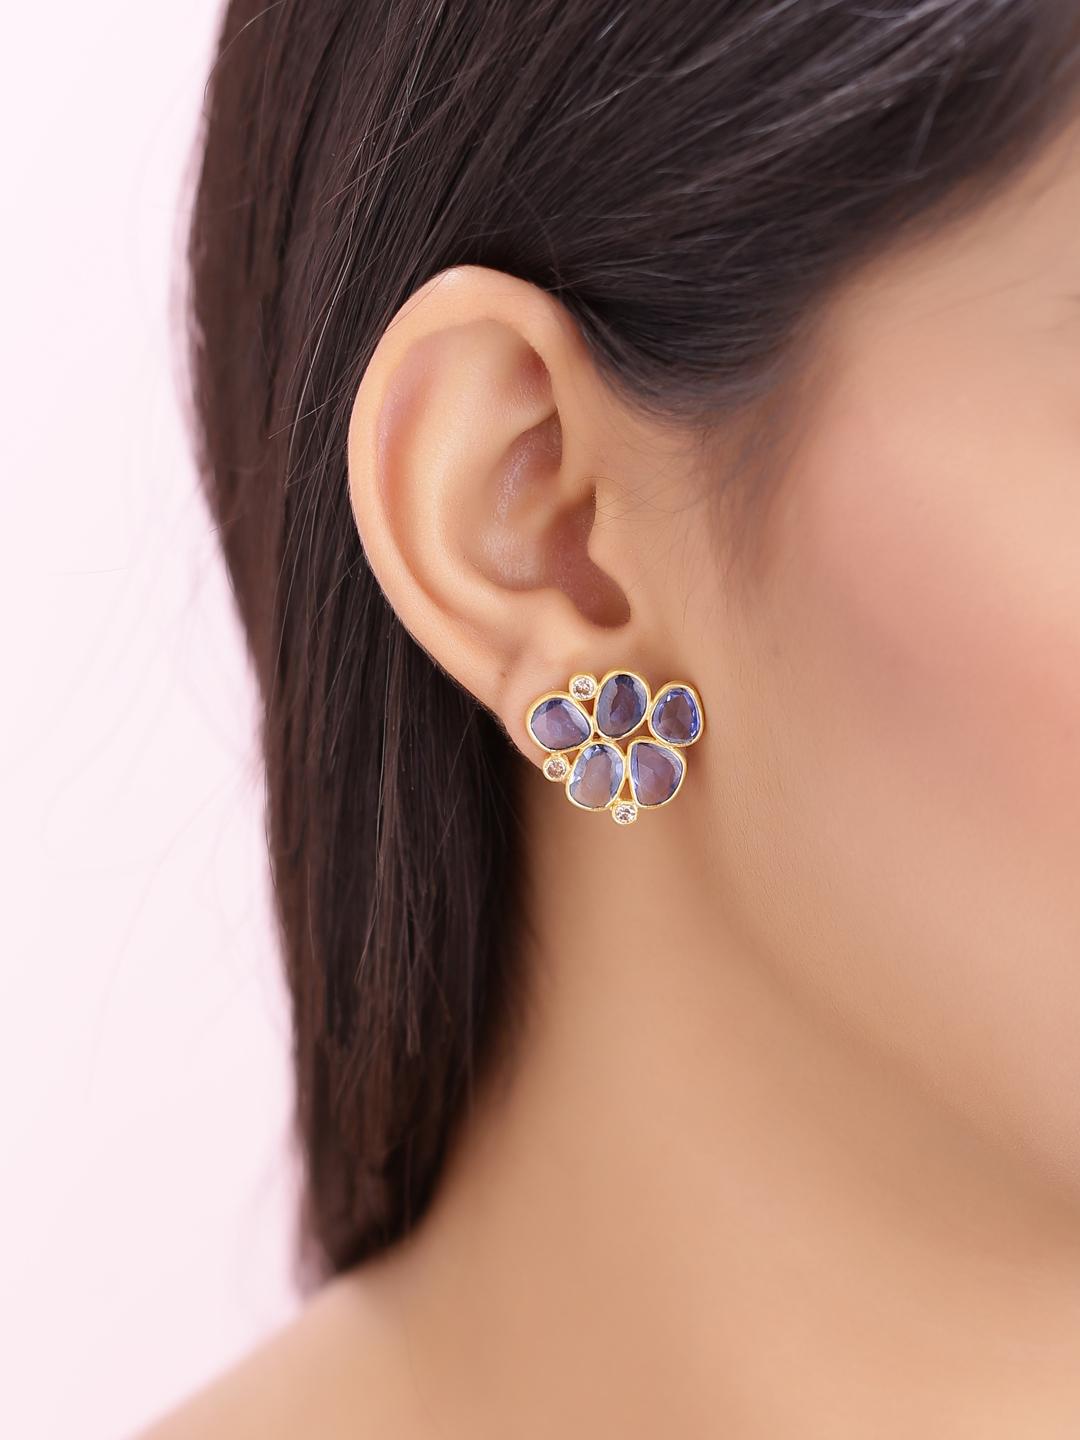 Modern Sapphire Rose Cut and Diamond Earring Pair Handcrafted in 22 Karat Yellow Gold